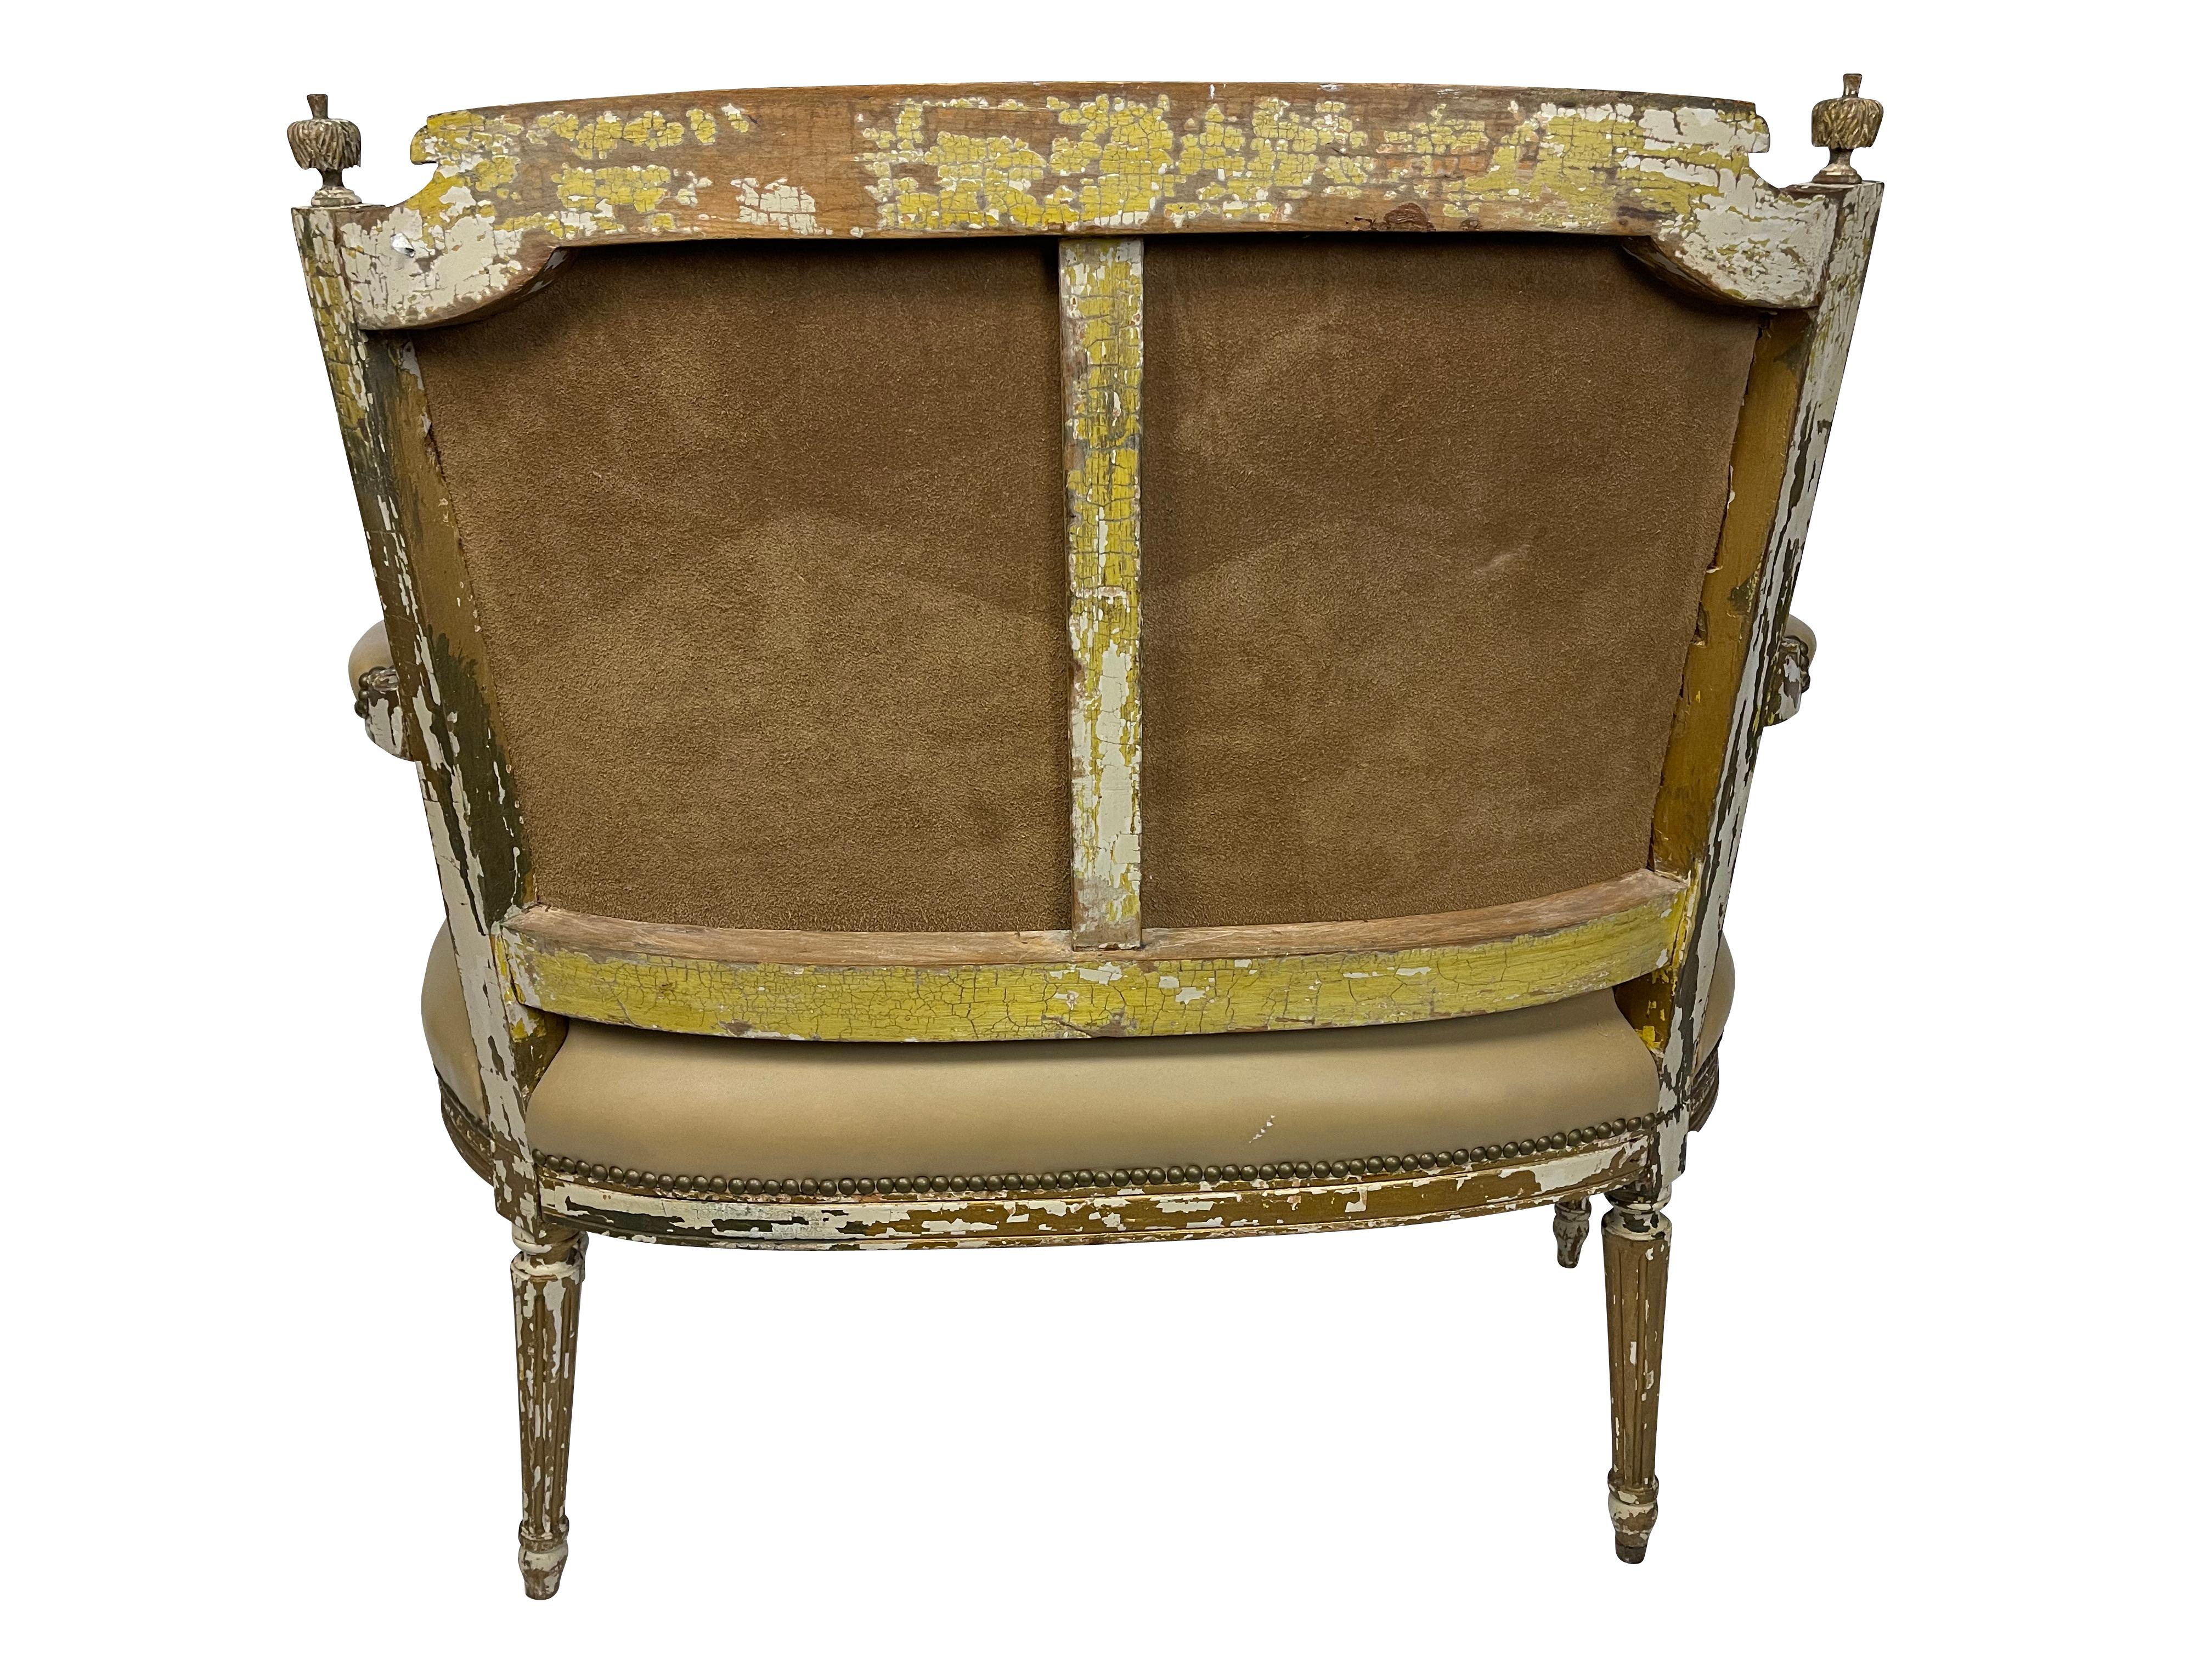 19th Century Italian Diminutive Painted Settee in Tan Leather For Sale 4